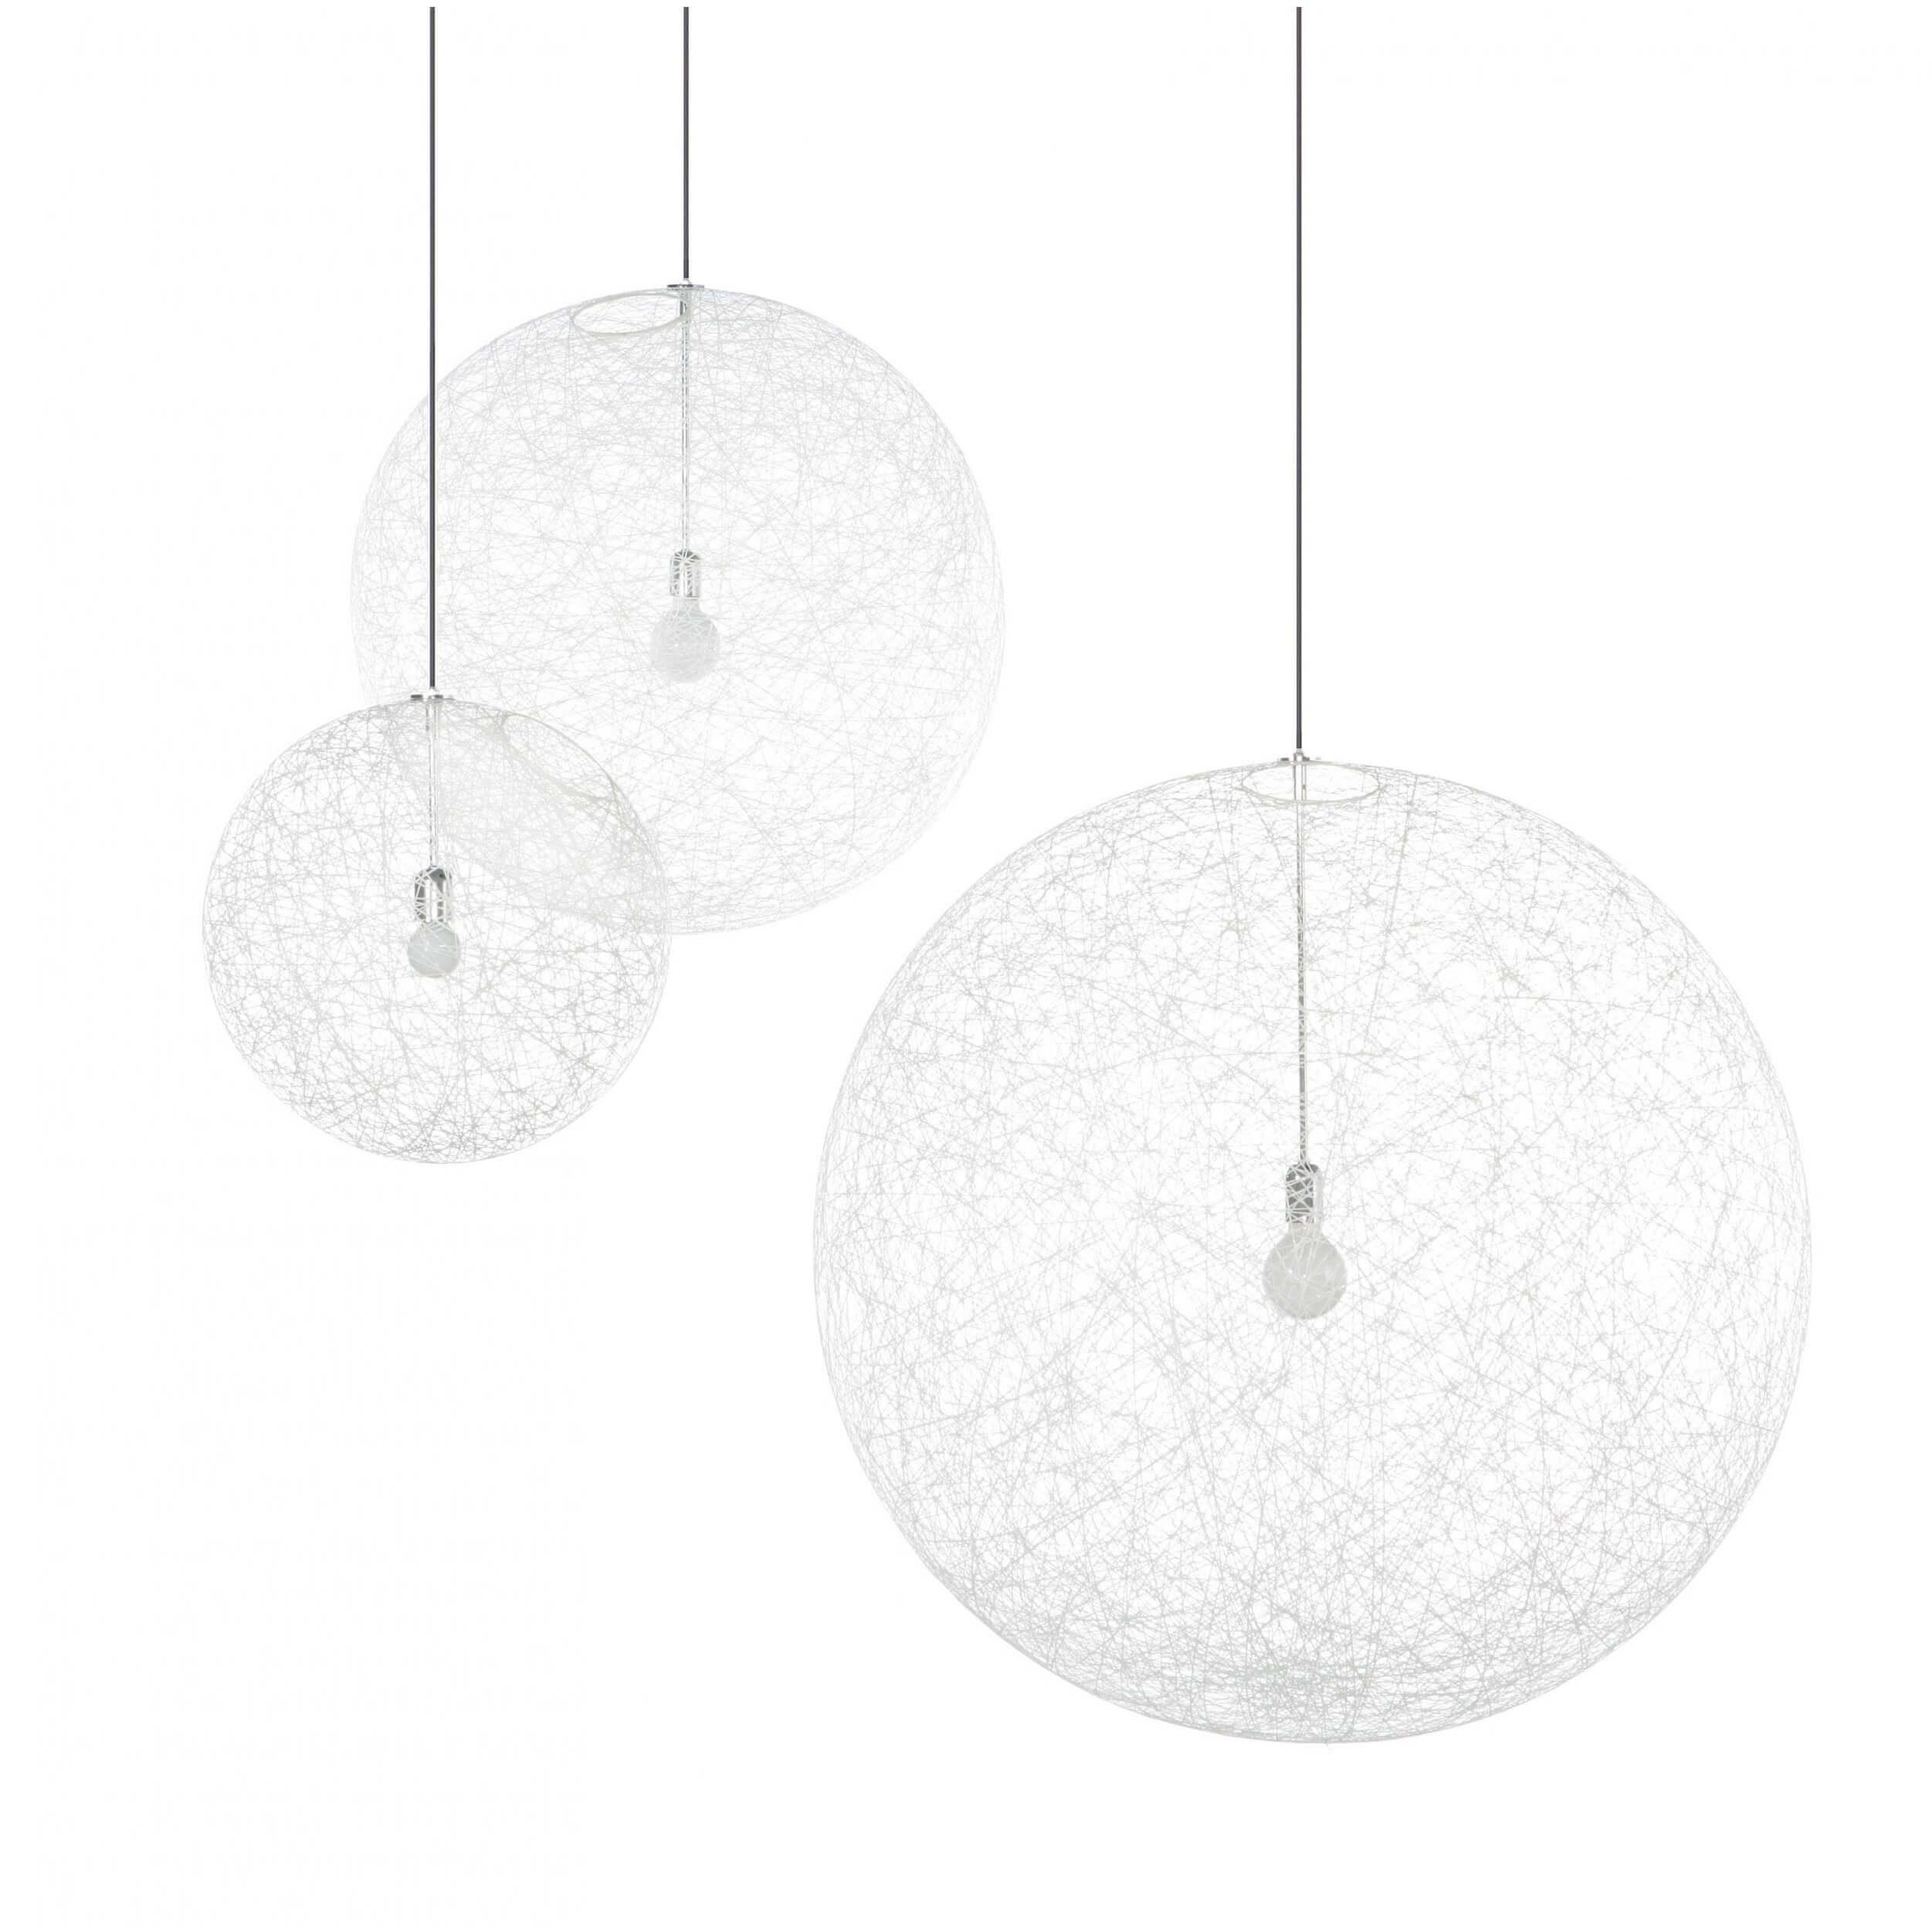 Light Suspension Light by exclusively through